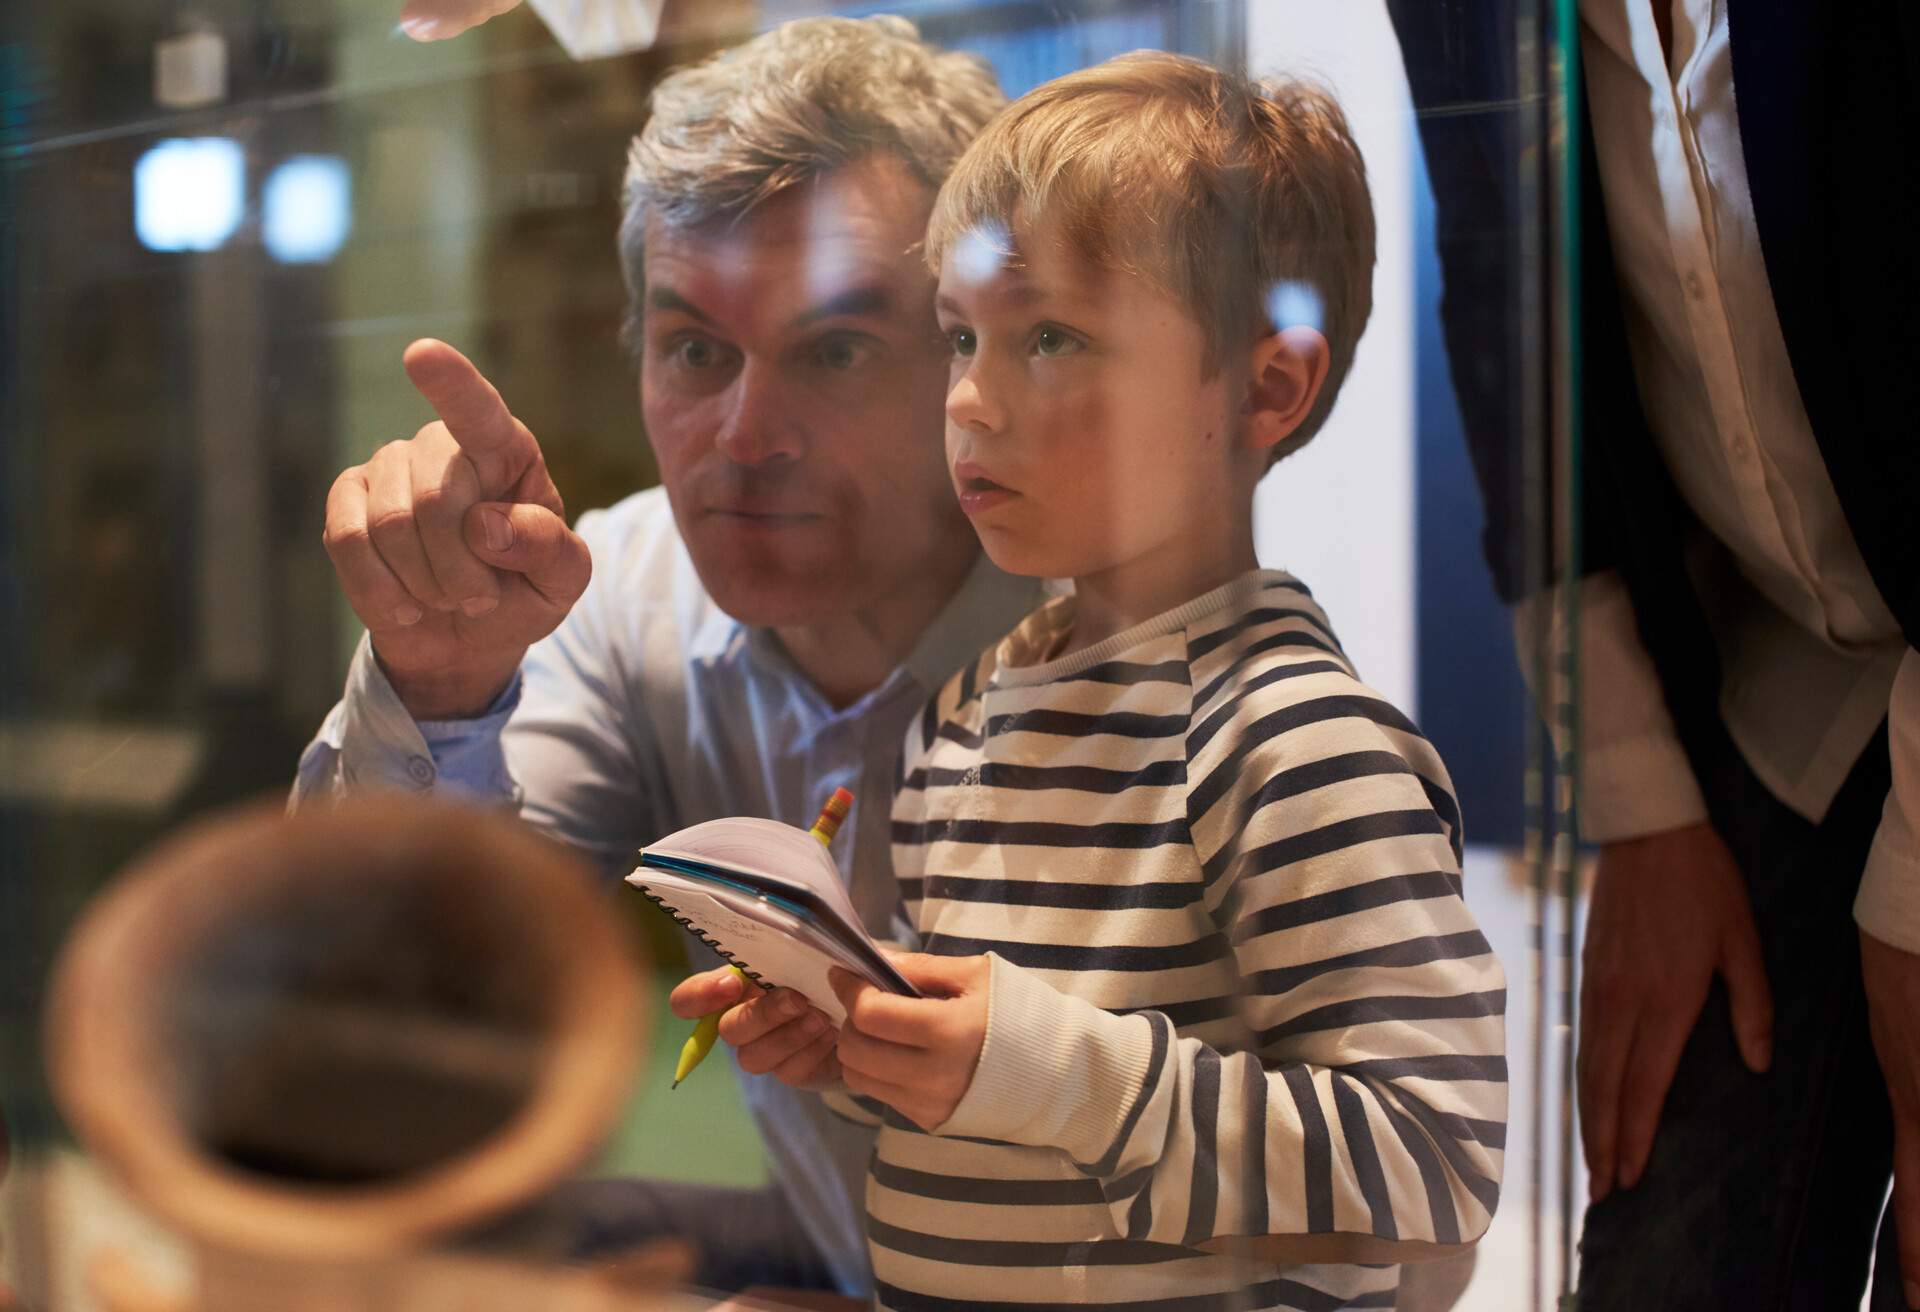 A father pointing at a display in a glass case as the son takes notes.